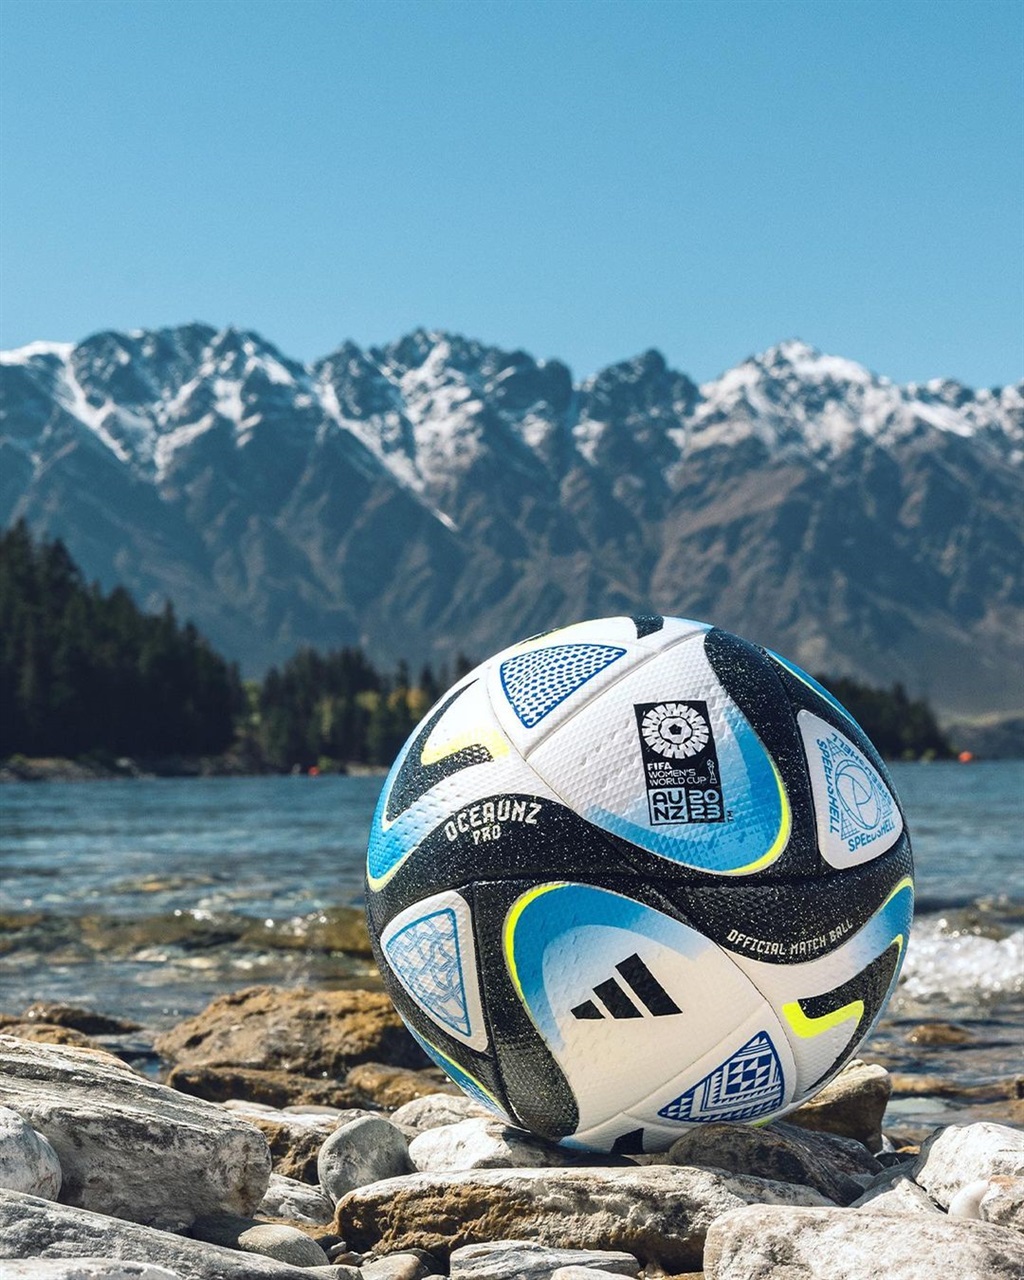 'OCEAUNZ' The official match ball for the 2023 FIF